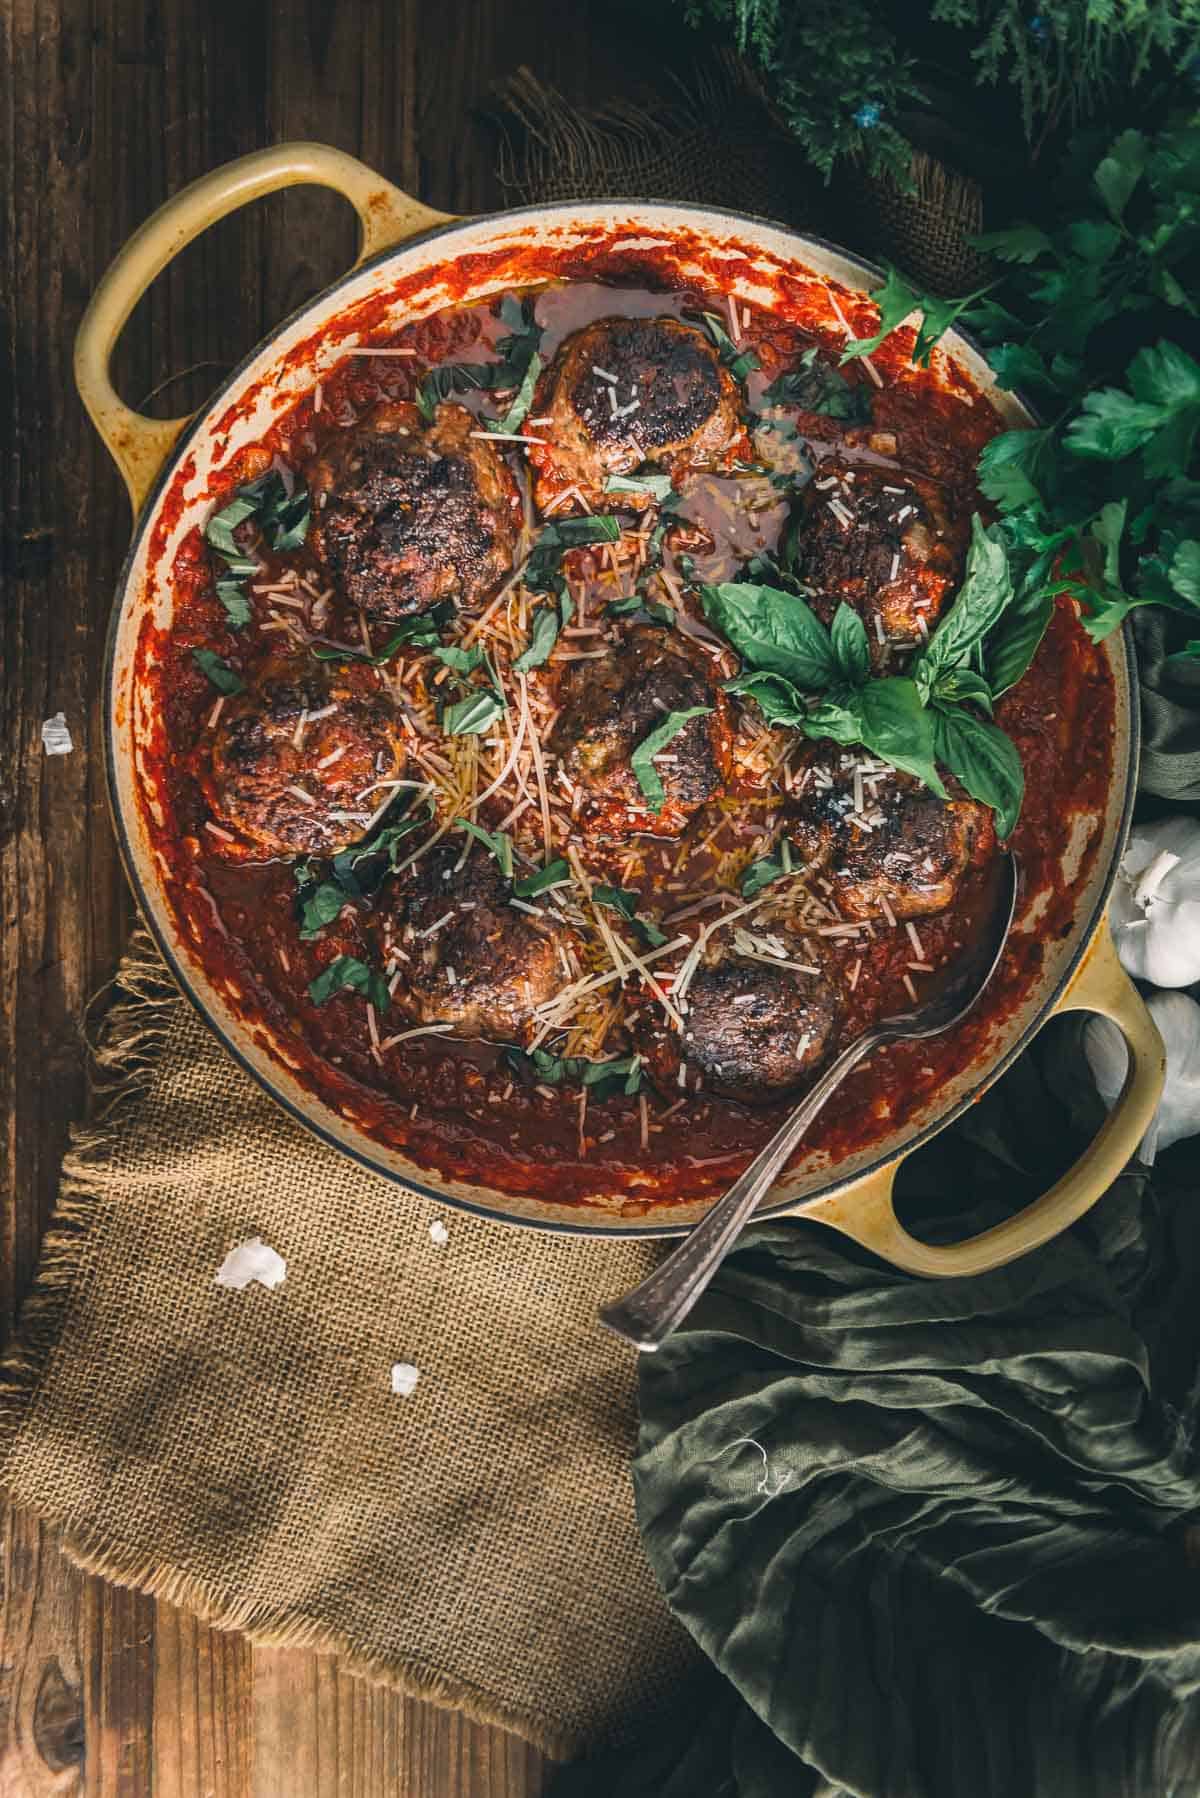 Meatballs in tomato sauce on a wooden table.